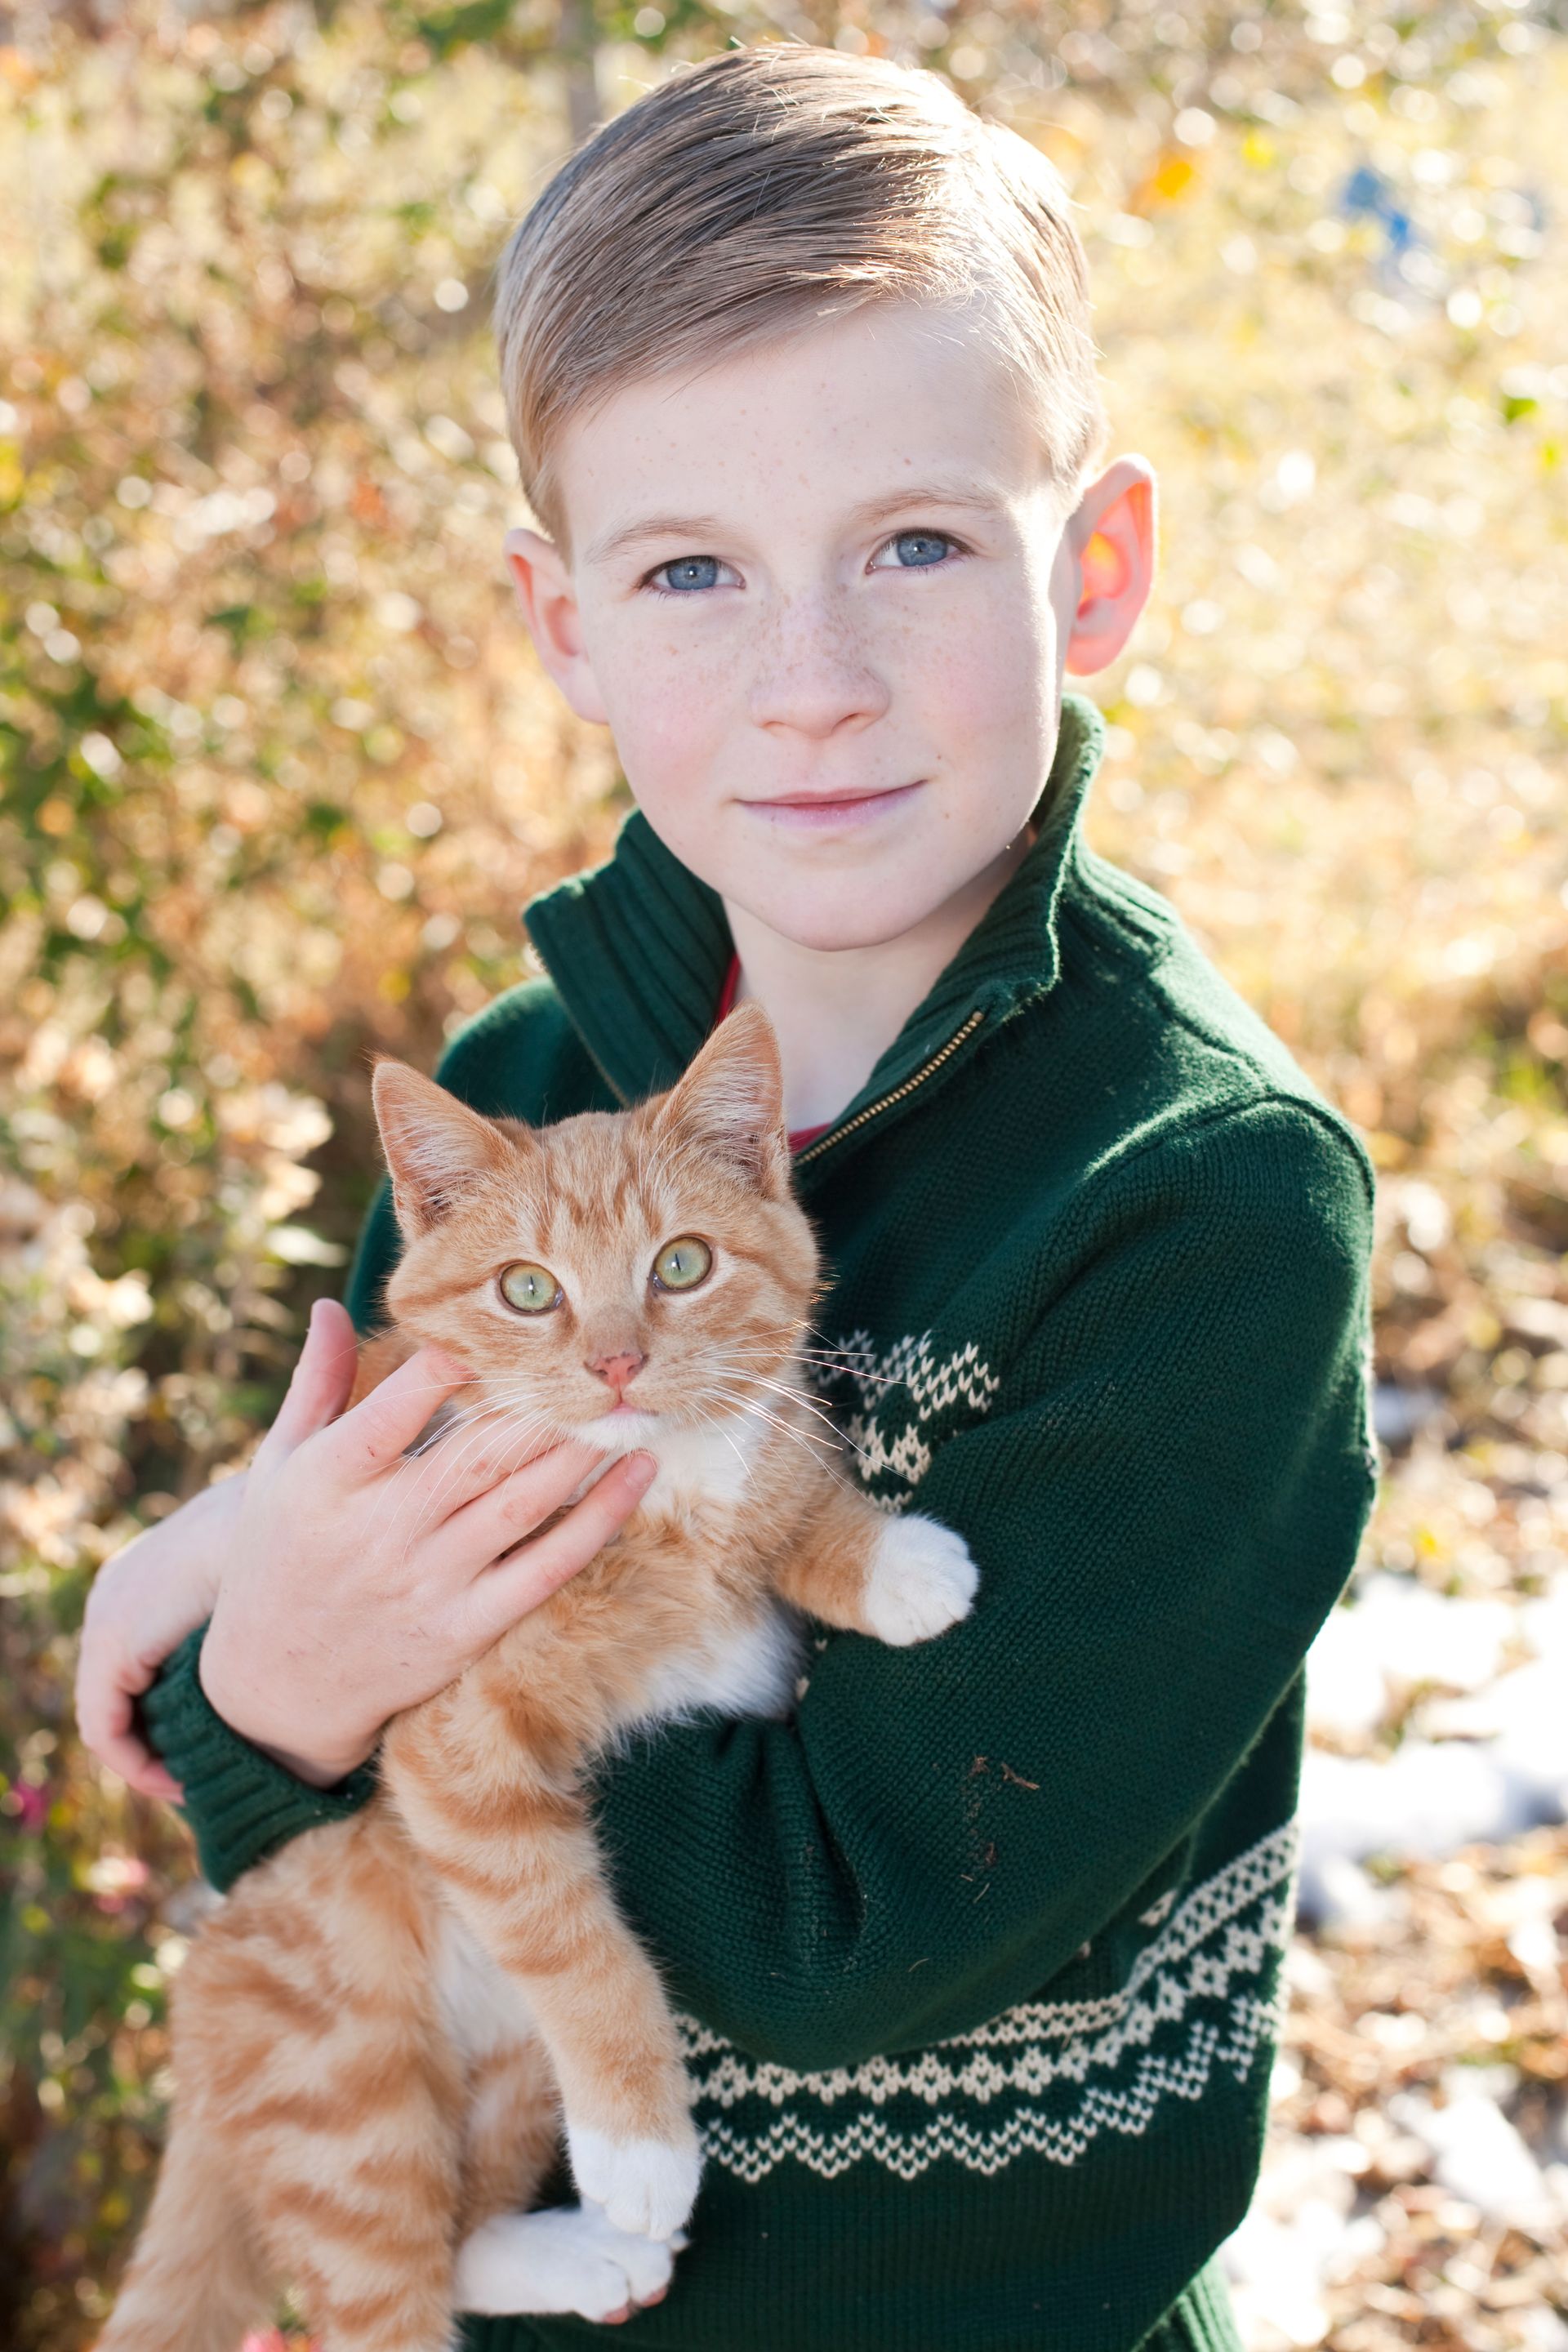 A young boy with a cat.